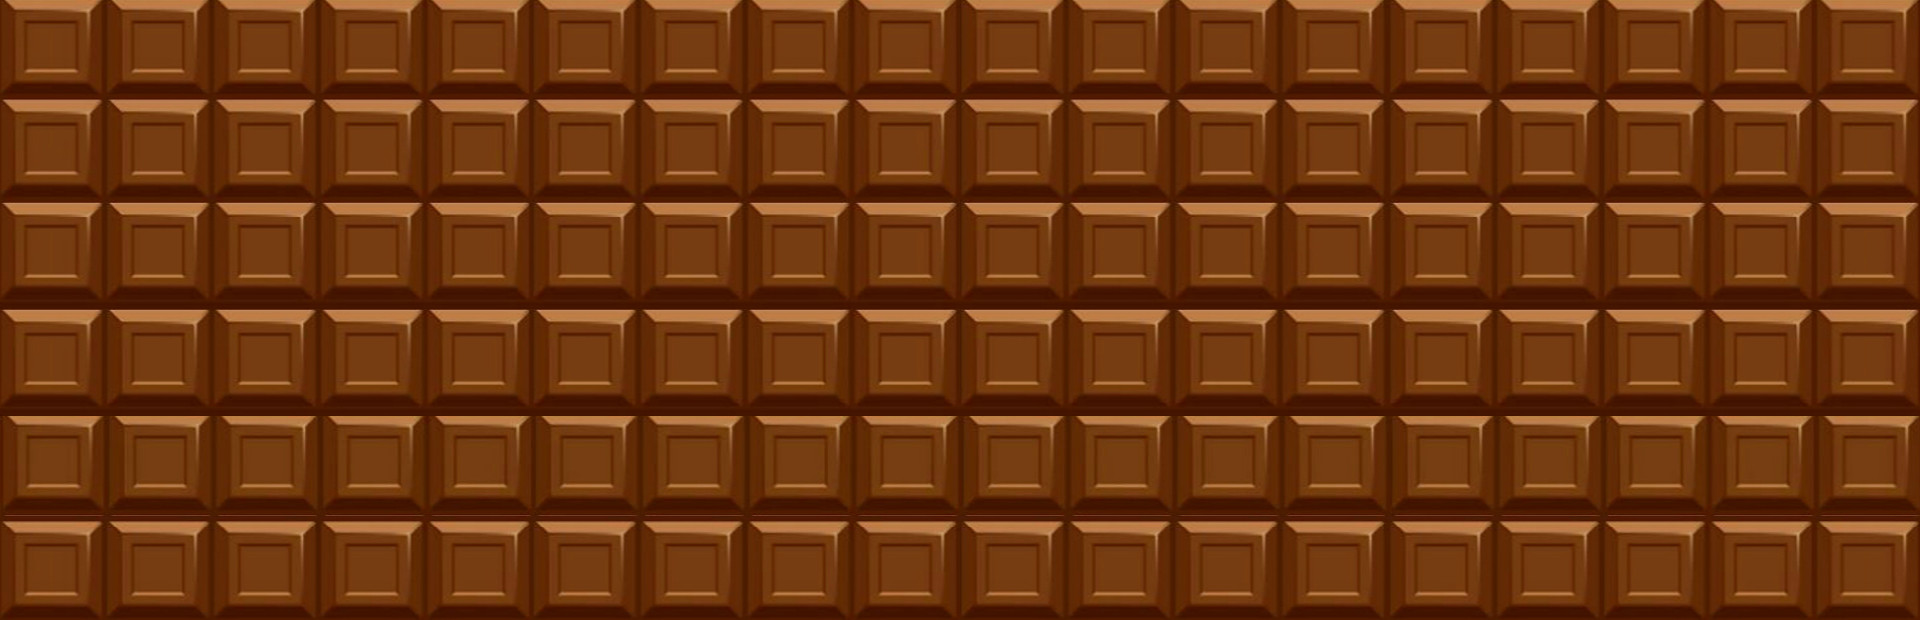 Chocolate makes you happy cover image